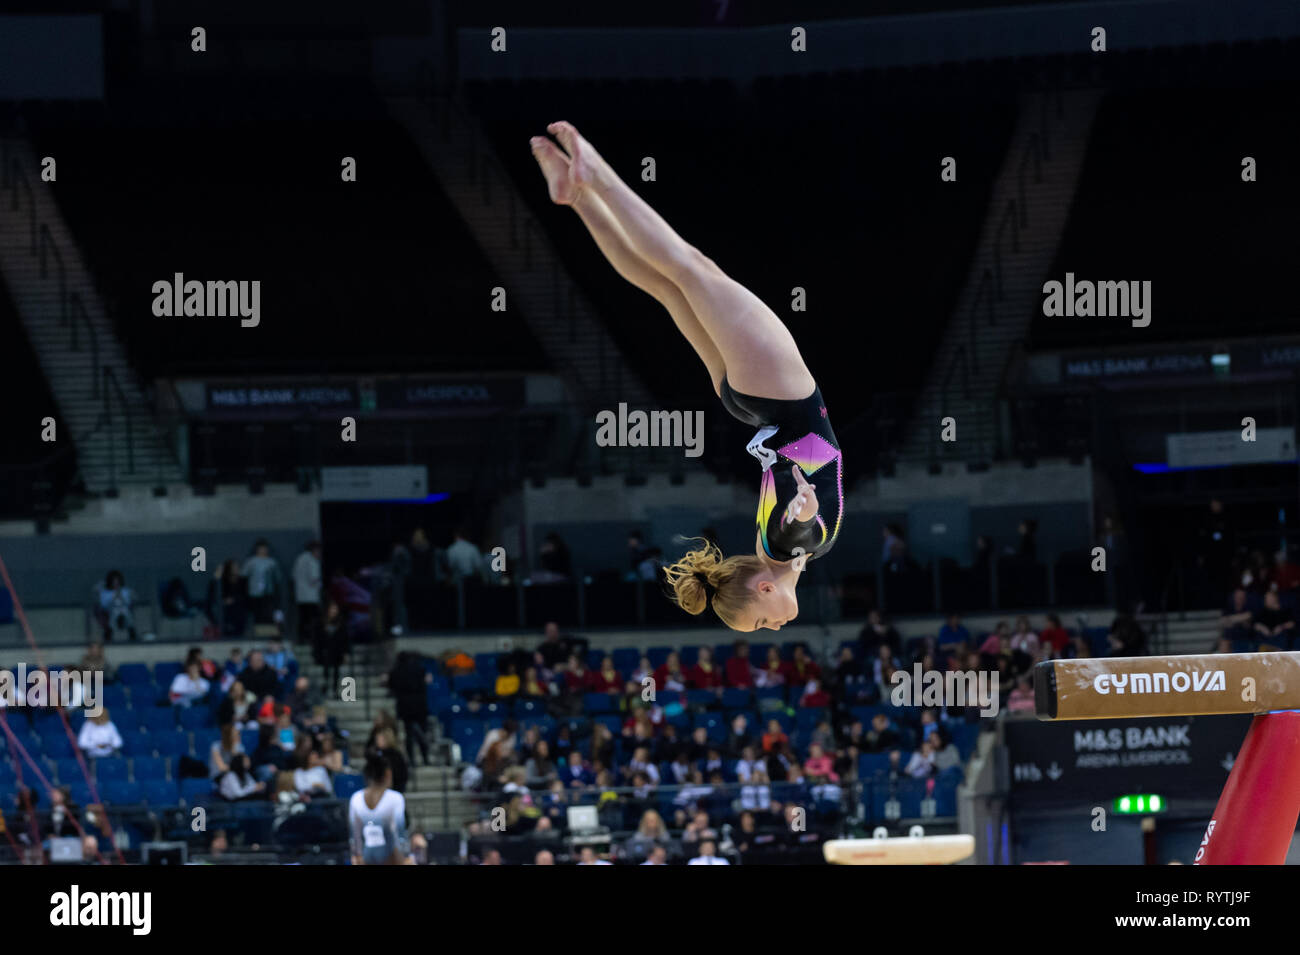 Liverpool, UK. 15th Mar, 2019. Lexie-Mae Neal of Abingdon Gymnastics Club competing during the beam rotation at the Men's and Women's Artistic British Championships 2019, M&S Bank Arena, Liverpool, UK. Credit: Iain Scott Photography/Alamy Live News Stock Photo